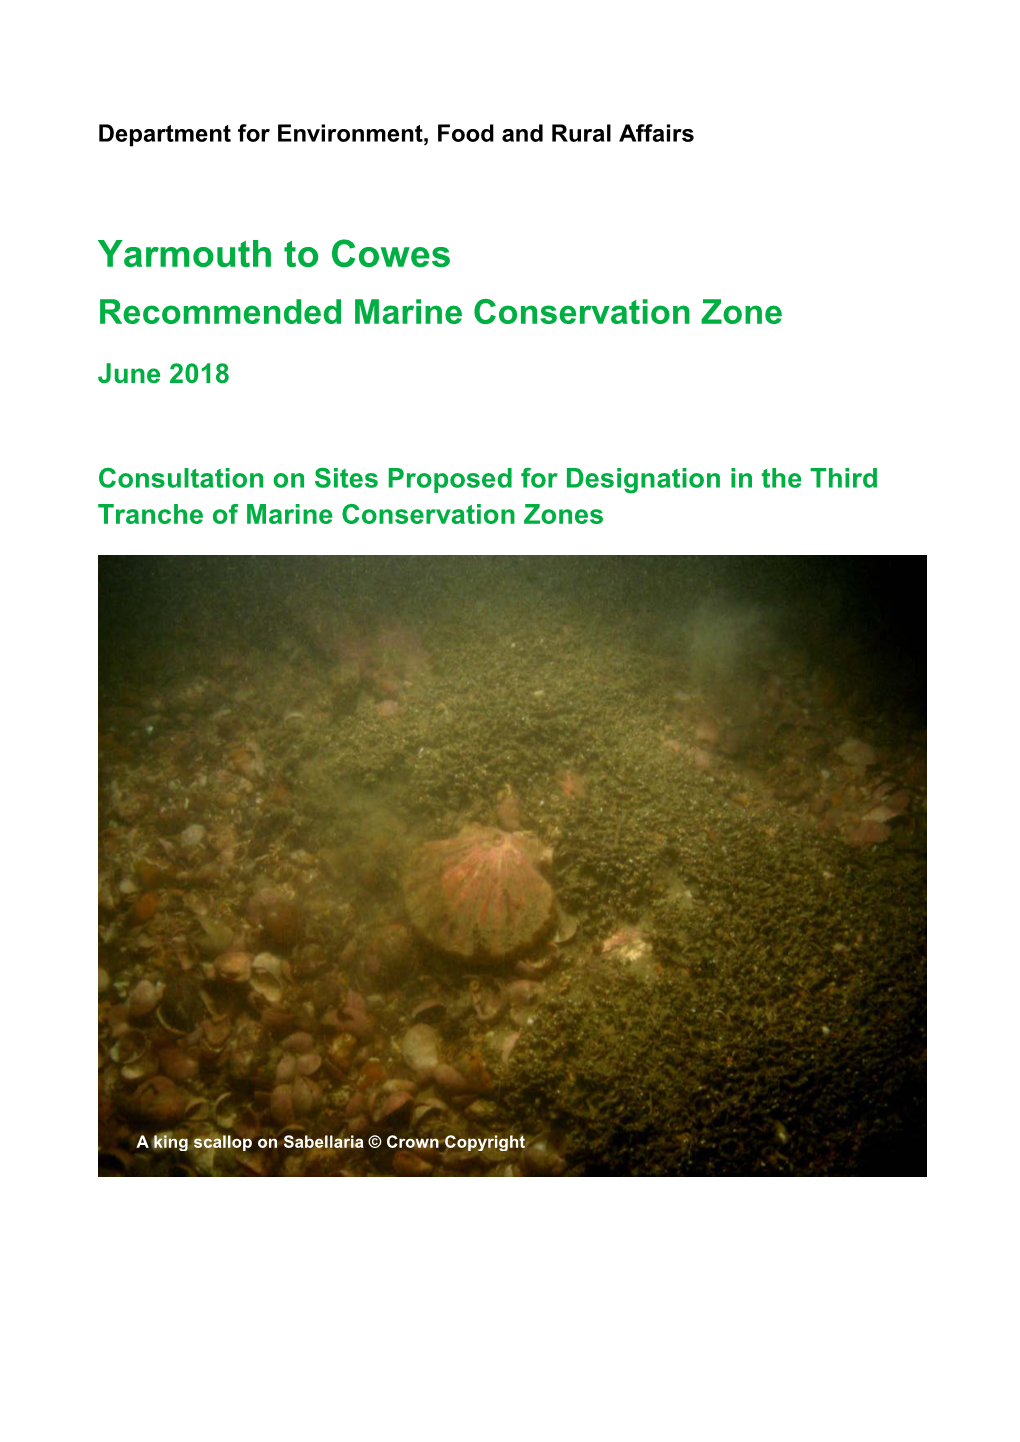 Yarmouth to Cowes Recommended Marine Conservation Zone